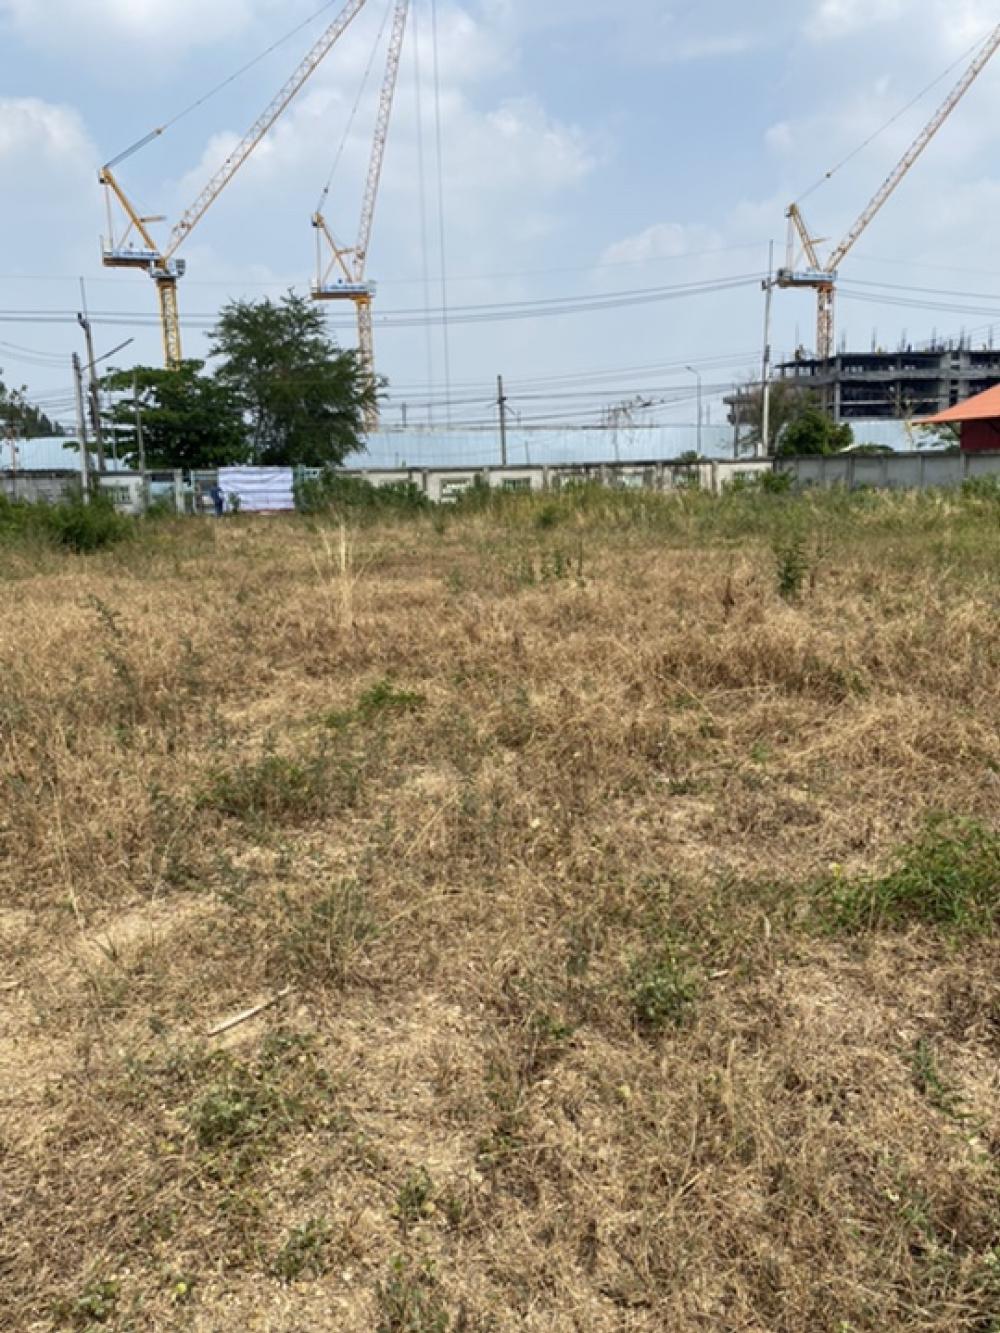 For RentLandPathum Thani,Rangsit, Thammasat : PA220366-01🔥Empty land for rent, Rangsit Municipality, 2 rai, with a cement fence surrounding the edge. 🔥At the mouth of Rangsit Municipal Soi 🔥Next to Rangsit BTS Station🔥Near the 200 Year Market🔥Located in Rangsit Municipality🔥